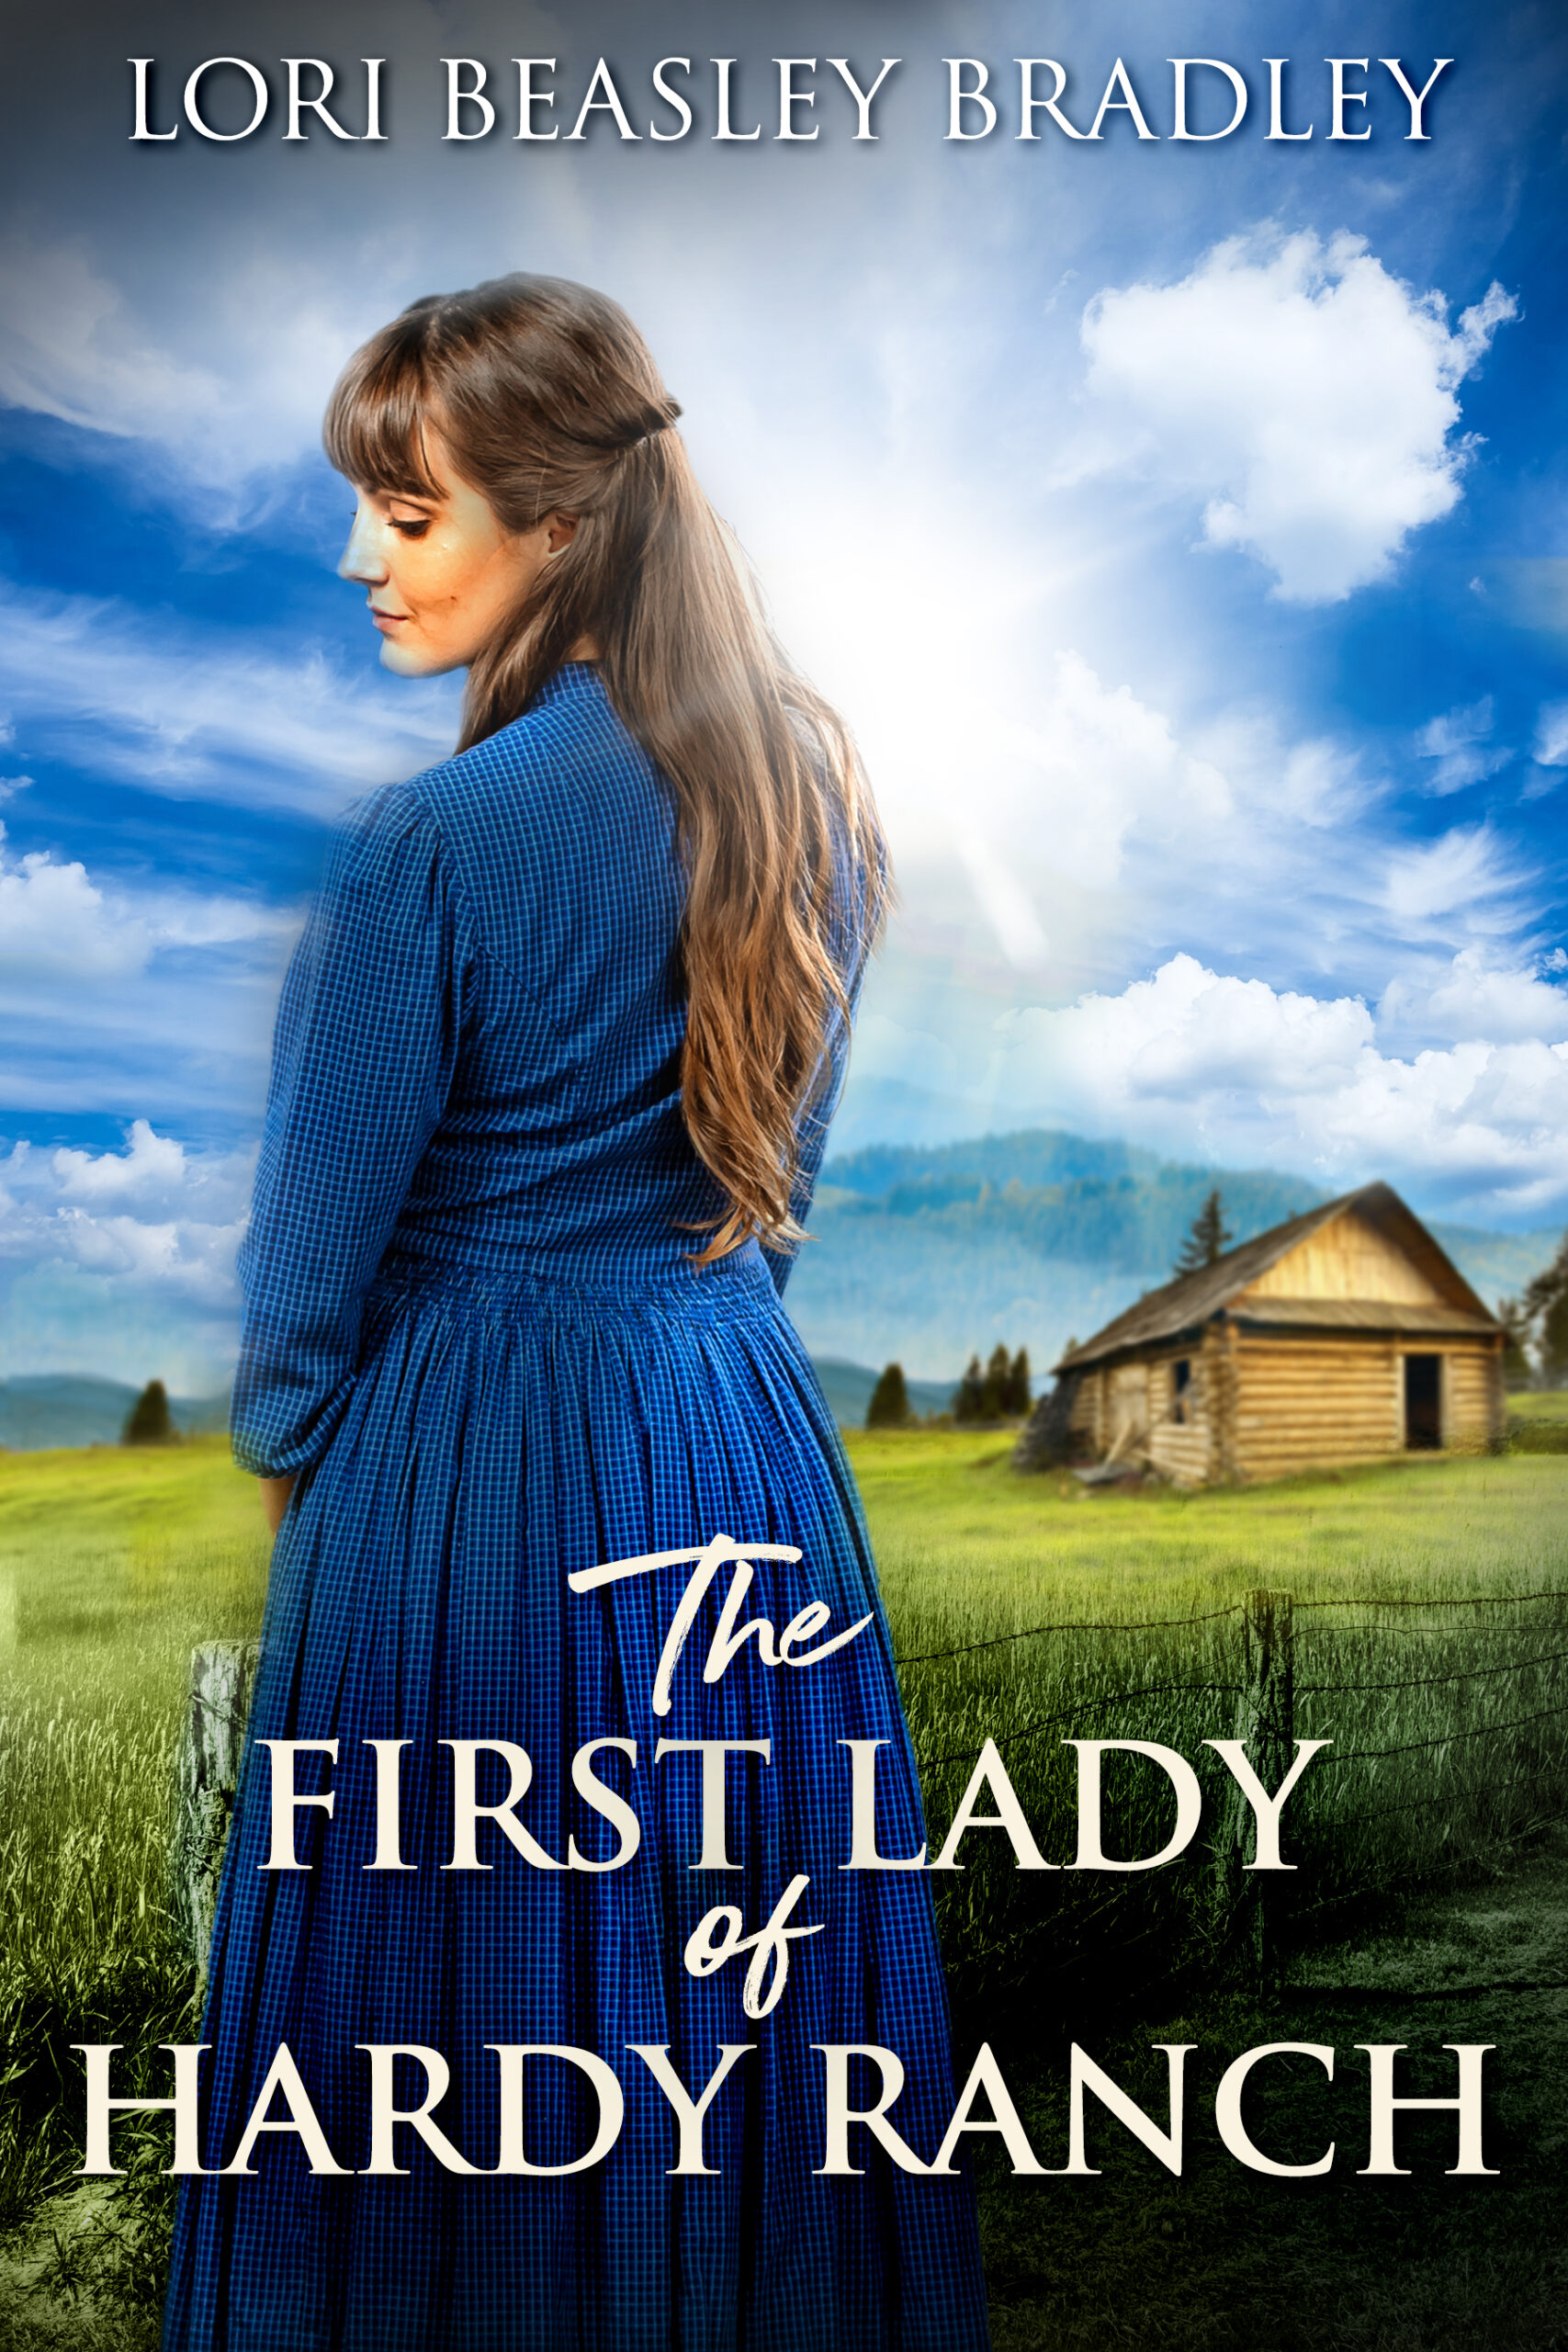 FREE: The First Lady Of Hardy Ranch by Lori Beasley Bradley